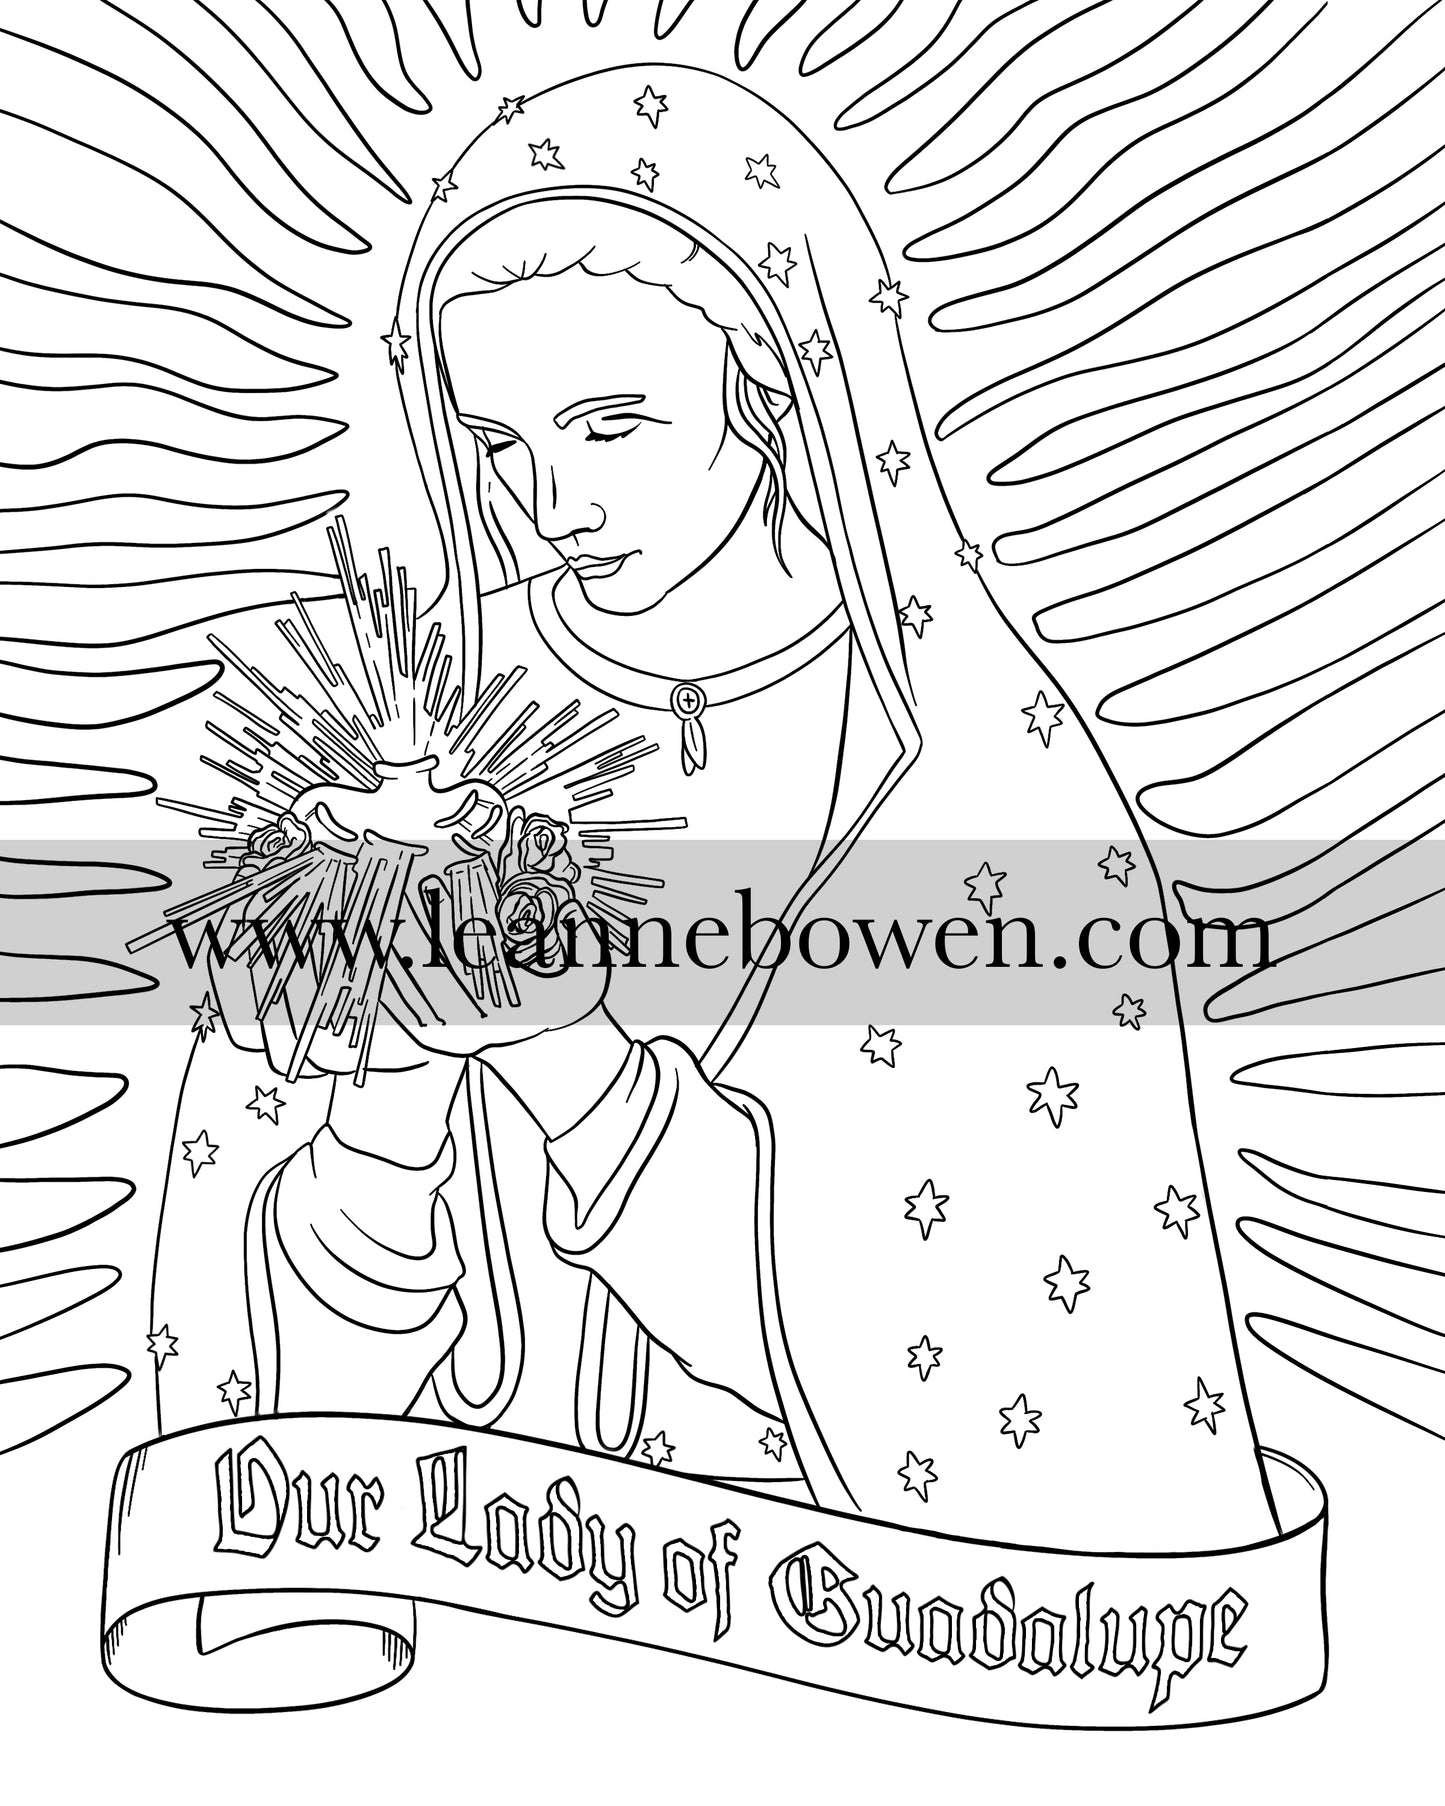 Our Lady of Guadalupe Coloring Page (Digital Download)